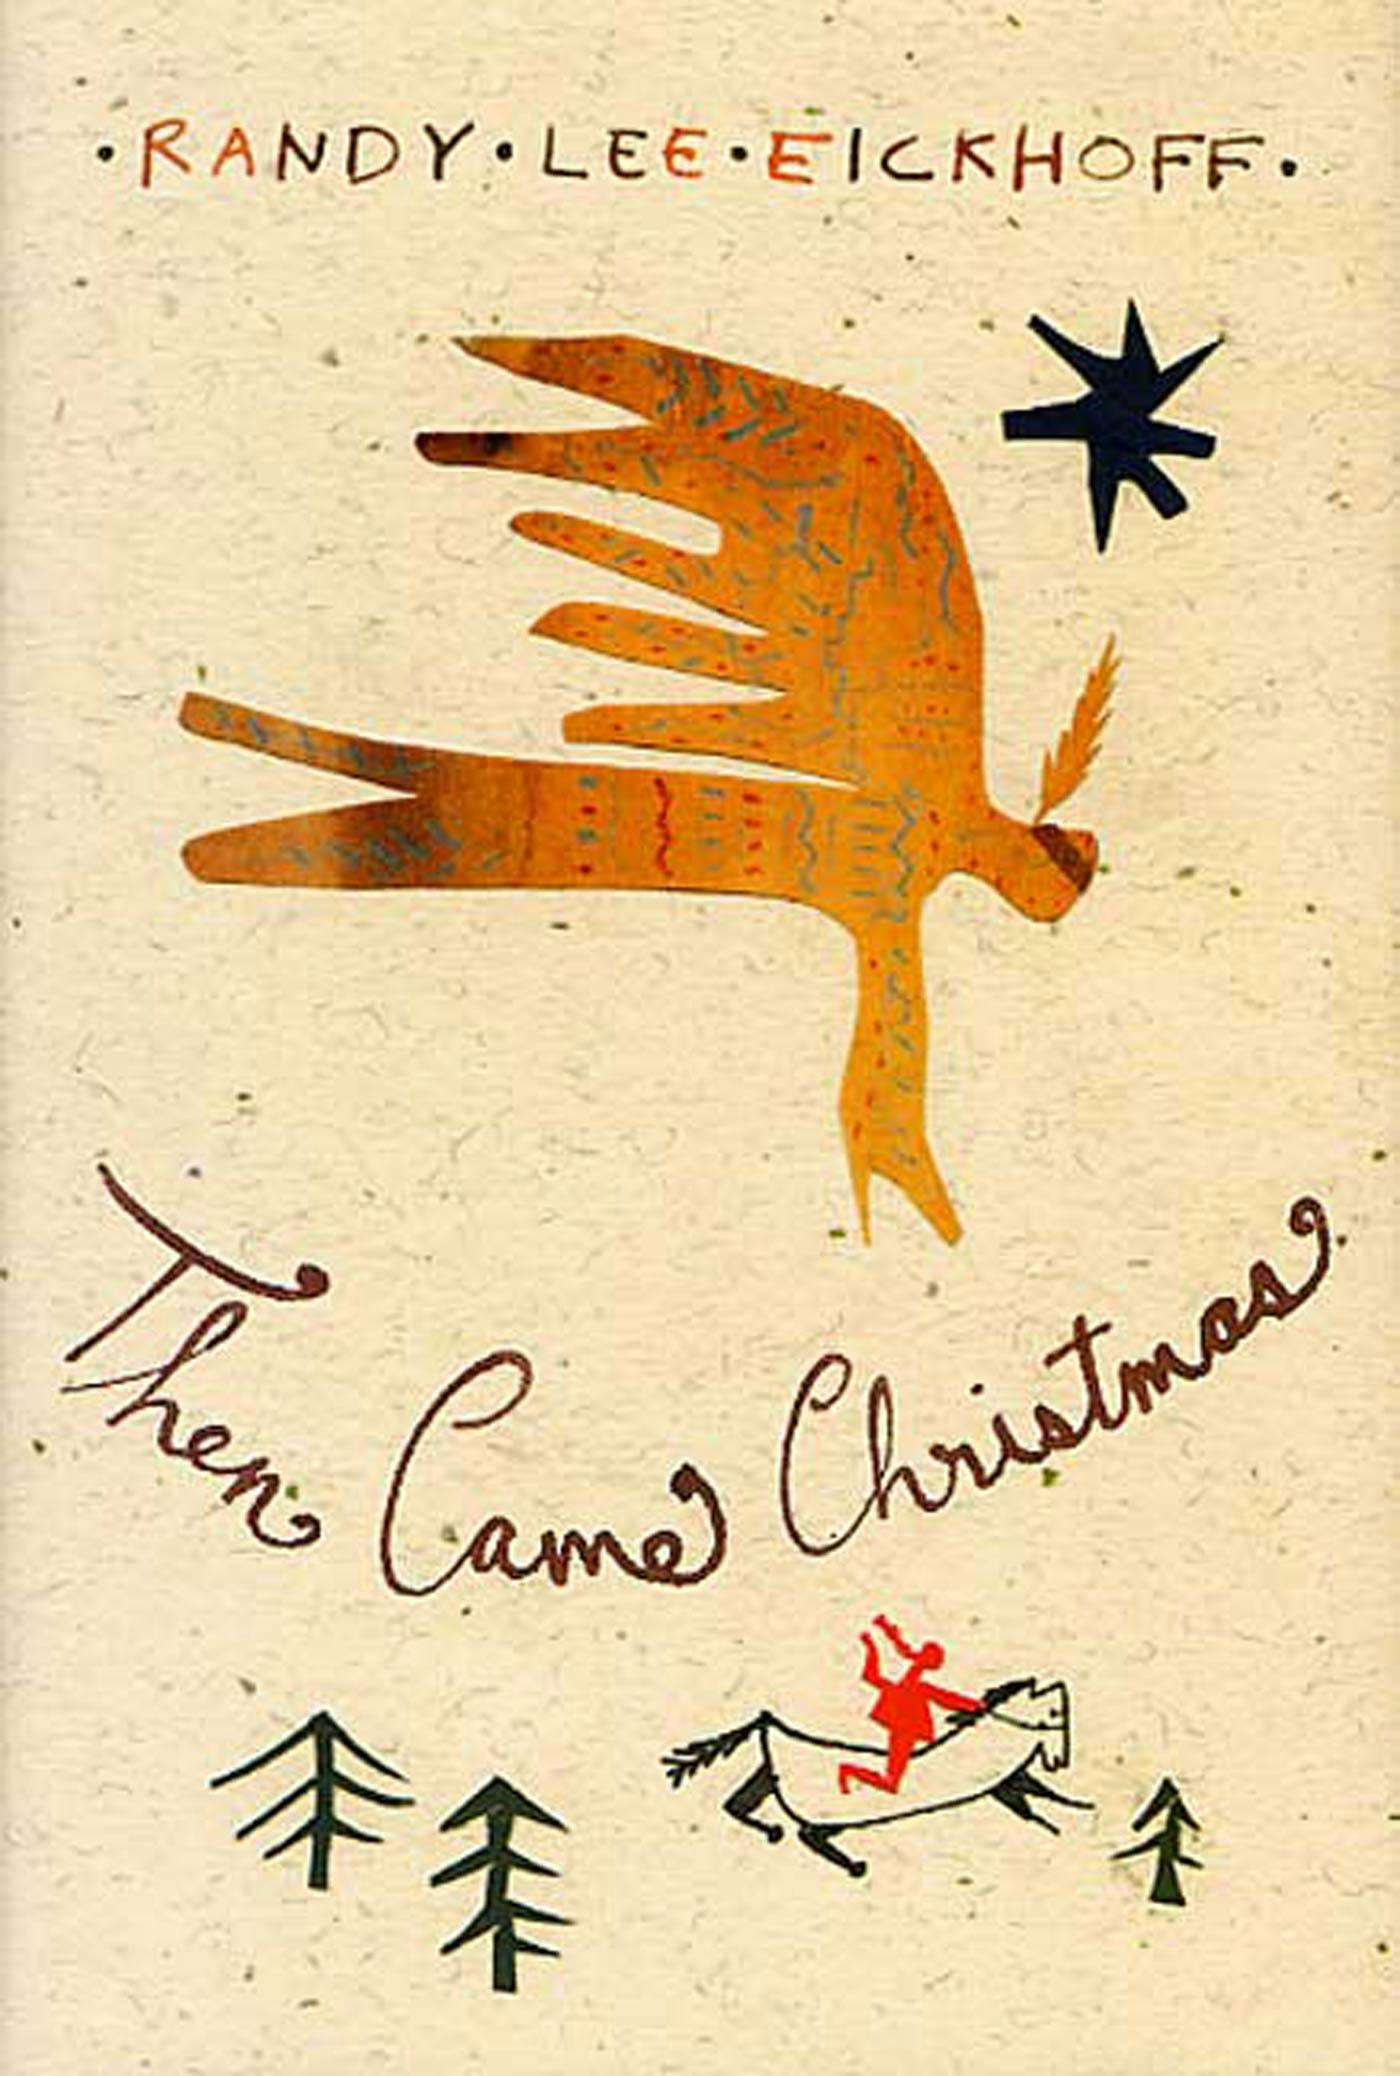 Cover for the book titled as: Then Came Christmas